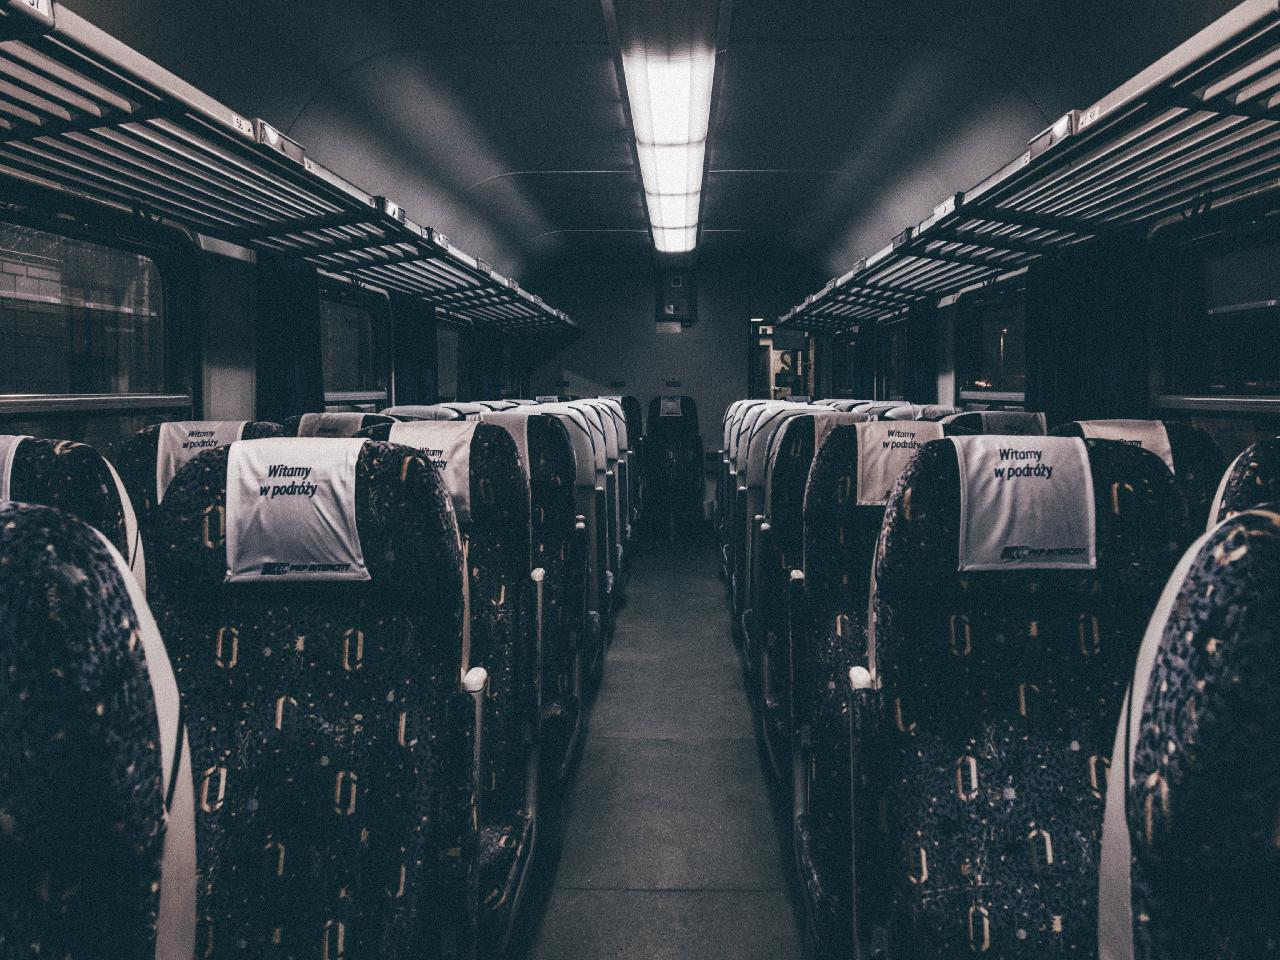 chairs in a dark bus